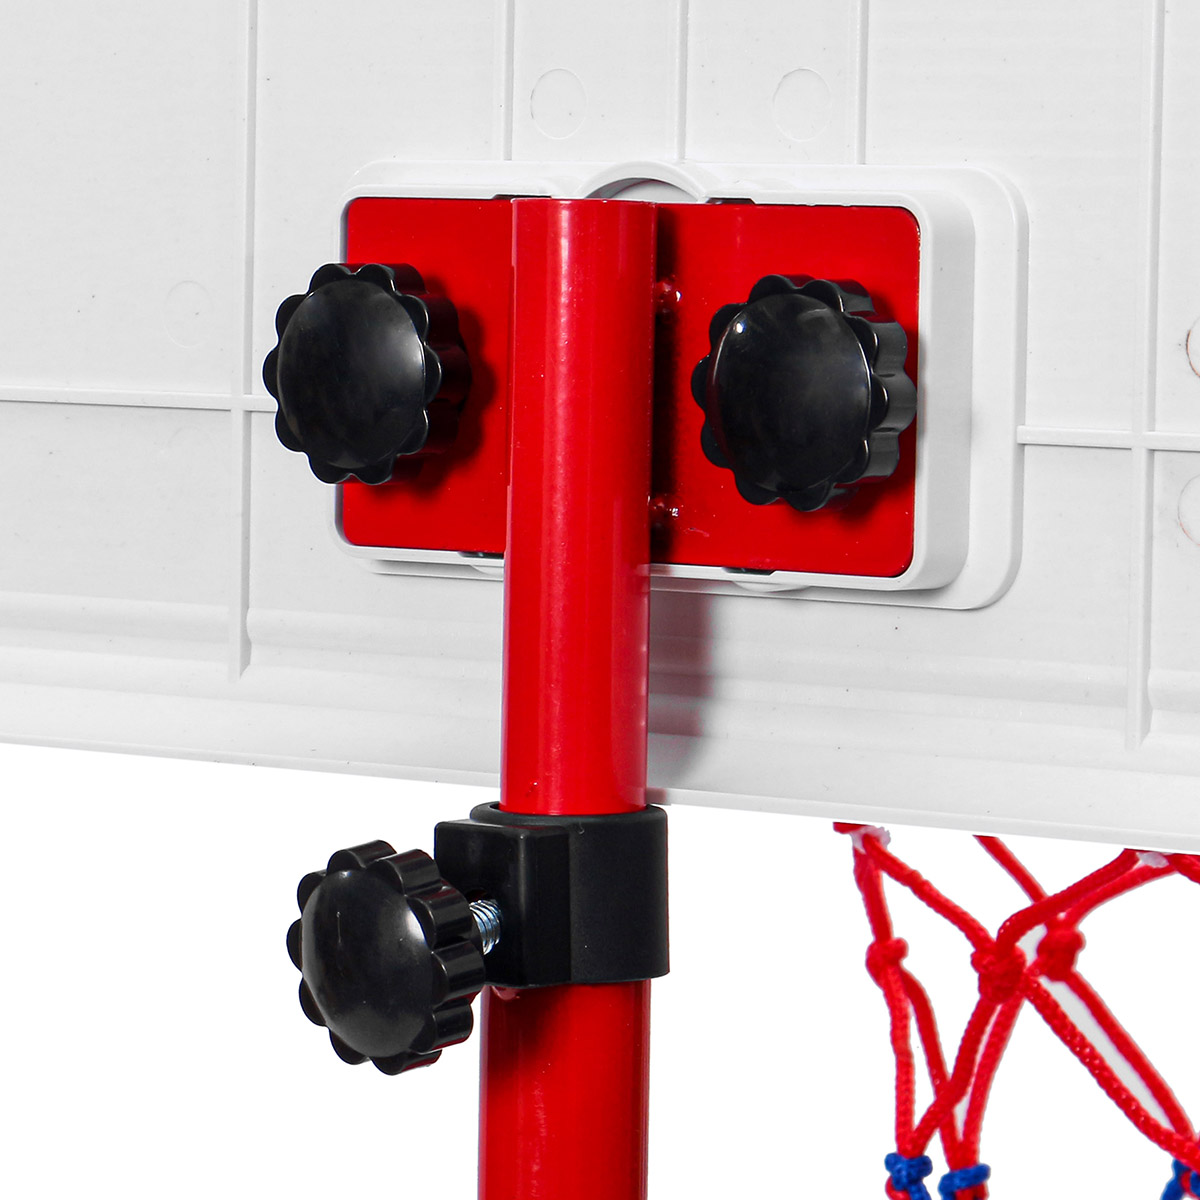 Liftable-Tire-Iron-Frame-Basketball-Stand-Childrens-Outdoor-Indoor-Sports-Shooting-Frame-Toys-1636599-4